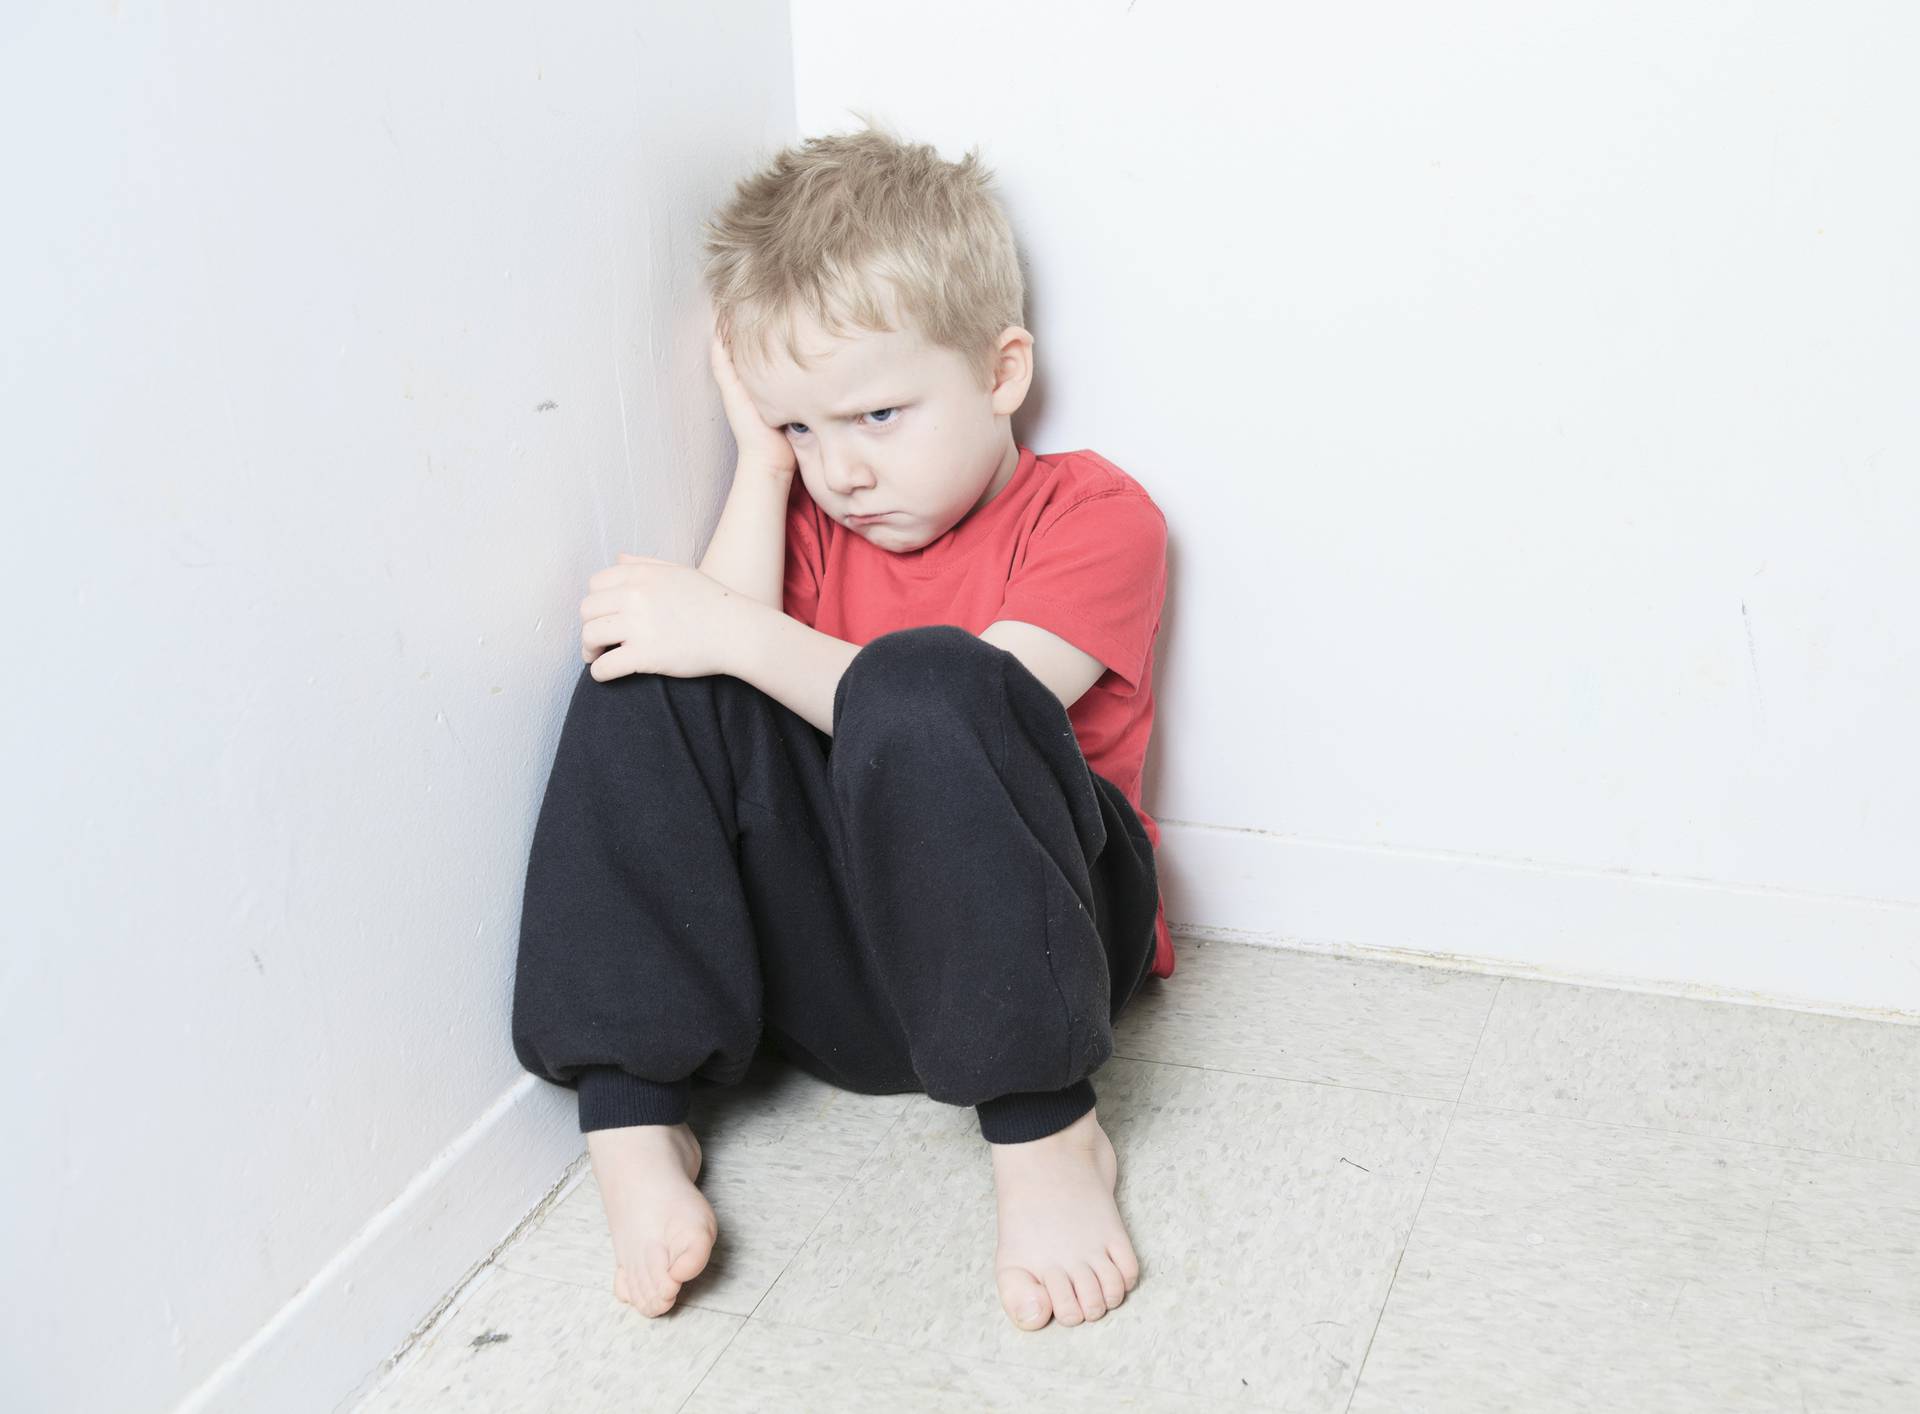 Neglected lonely child leaning at the wall